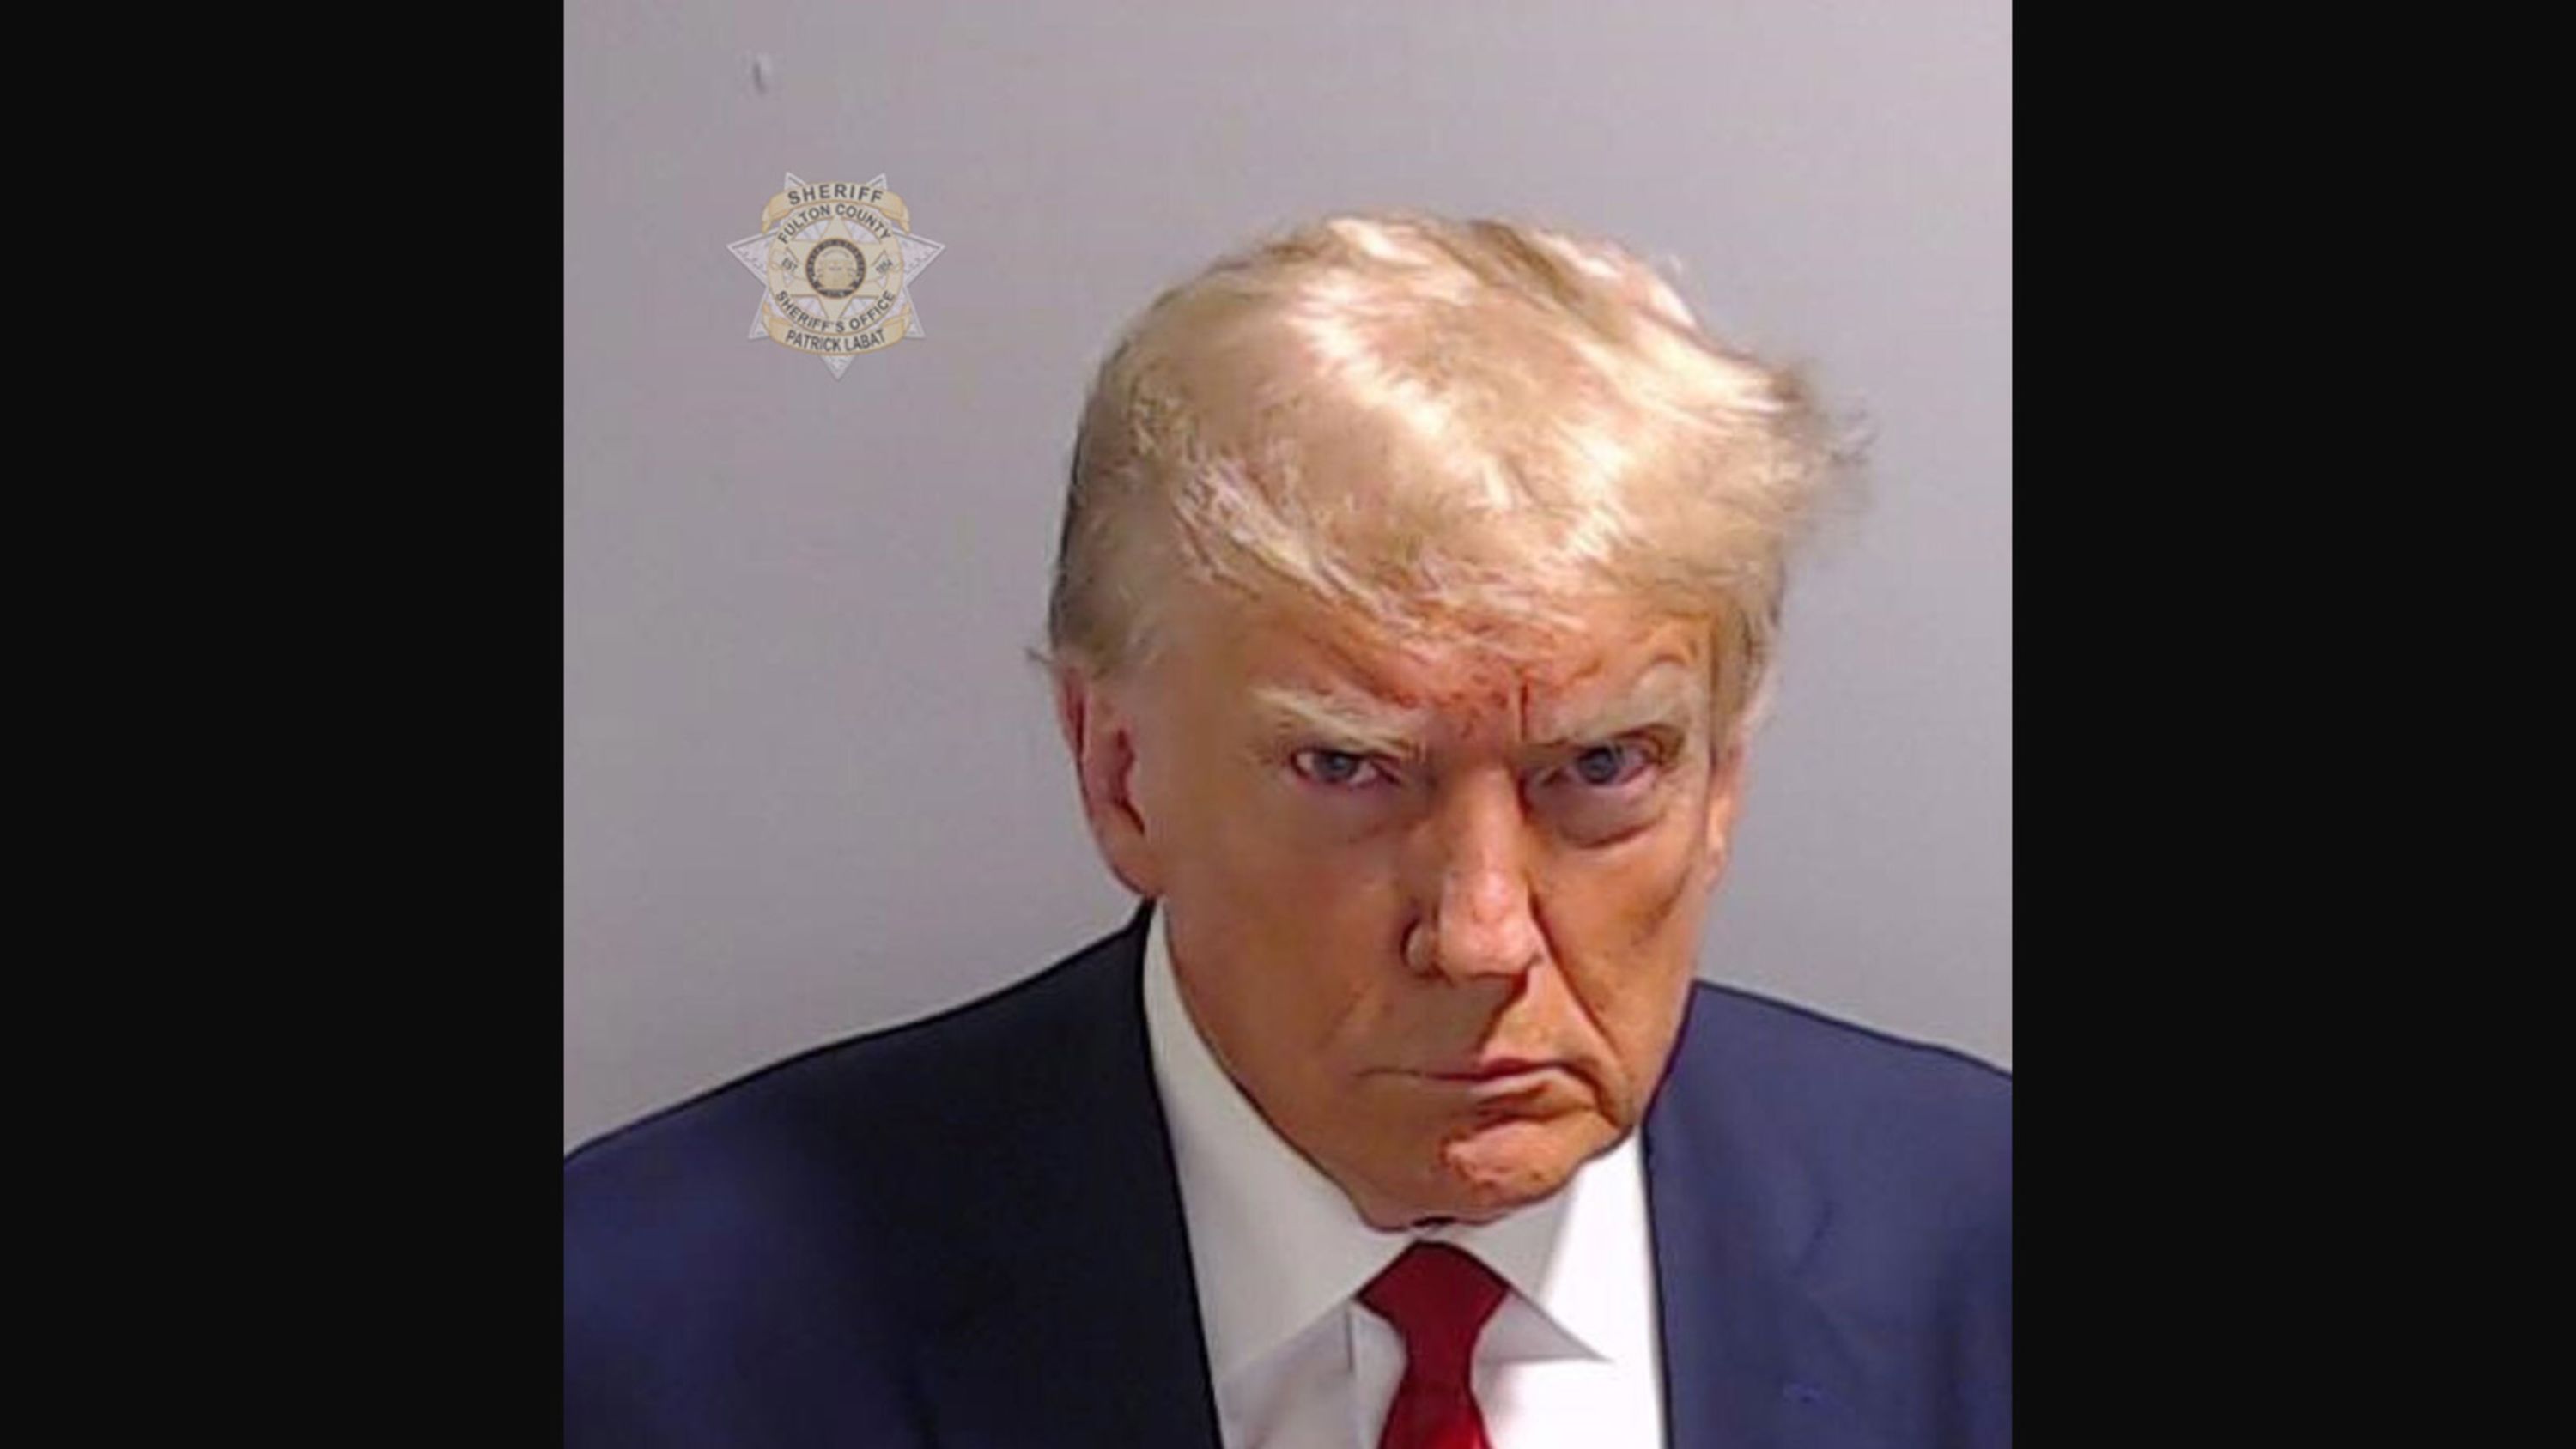 This <a href="index.php?page=&url=https%3A%2F%2Fwww.cnn.com%2F2023%2F08%2F24%2Fpolitics%2Ftrump-mug-shot-analysis%2Findex.html" target="_blank">booking photo</a> of former President Donald Trump was taken in Atlanta on Thursday, August 24. Trump was booked on more than a dozen charges stemming from his efforts to reverse Georgia's 2020 election results. His booking number was P01135809. He is the first former US president with a mug shot.